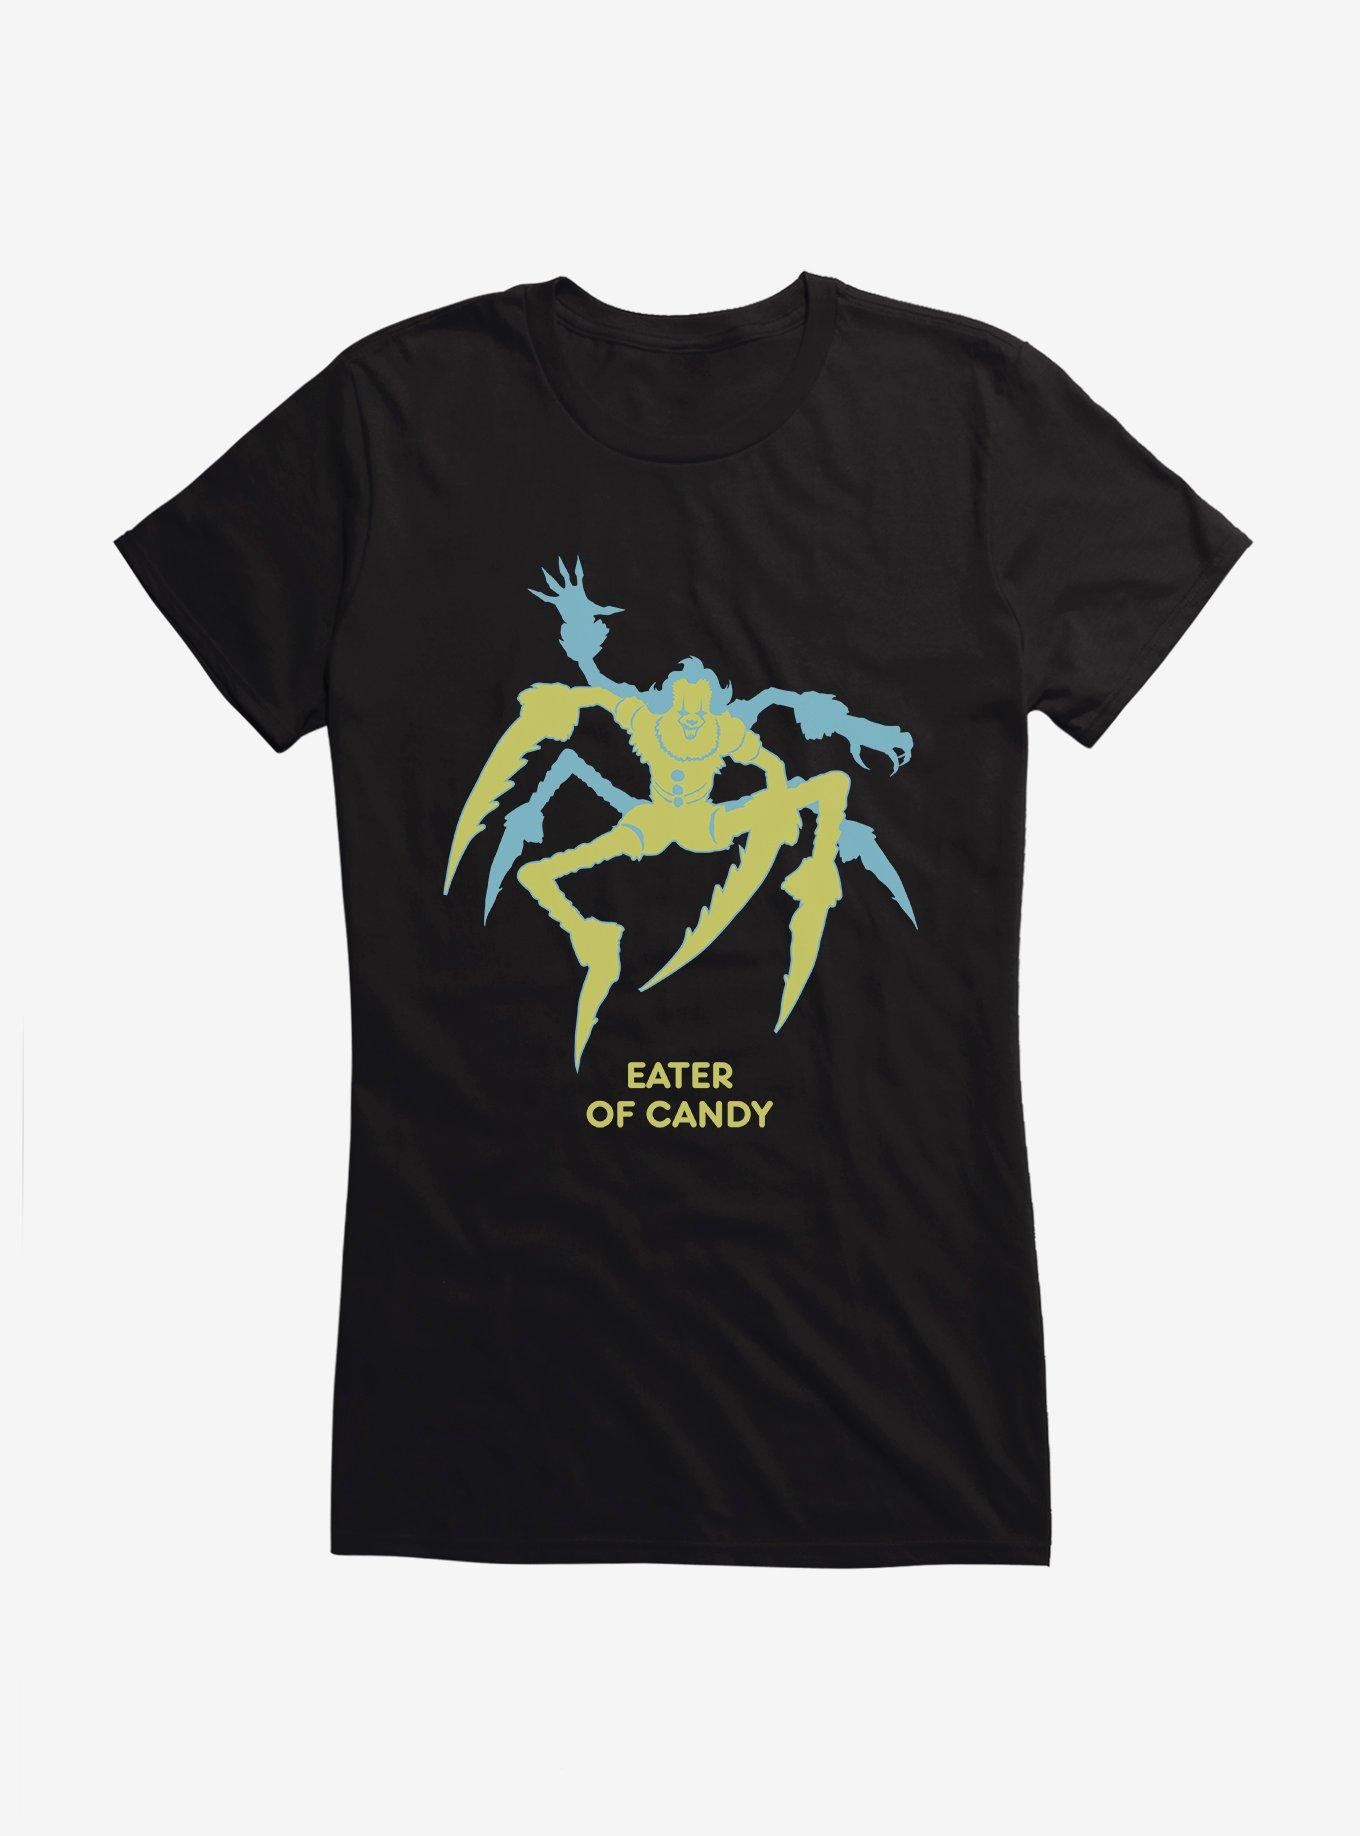 IT2 Eater Of Candy Girls T-Shirt